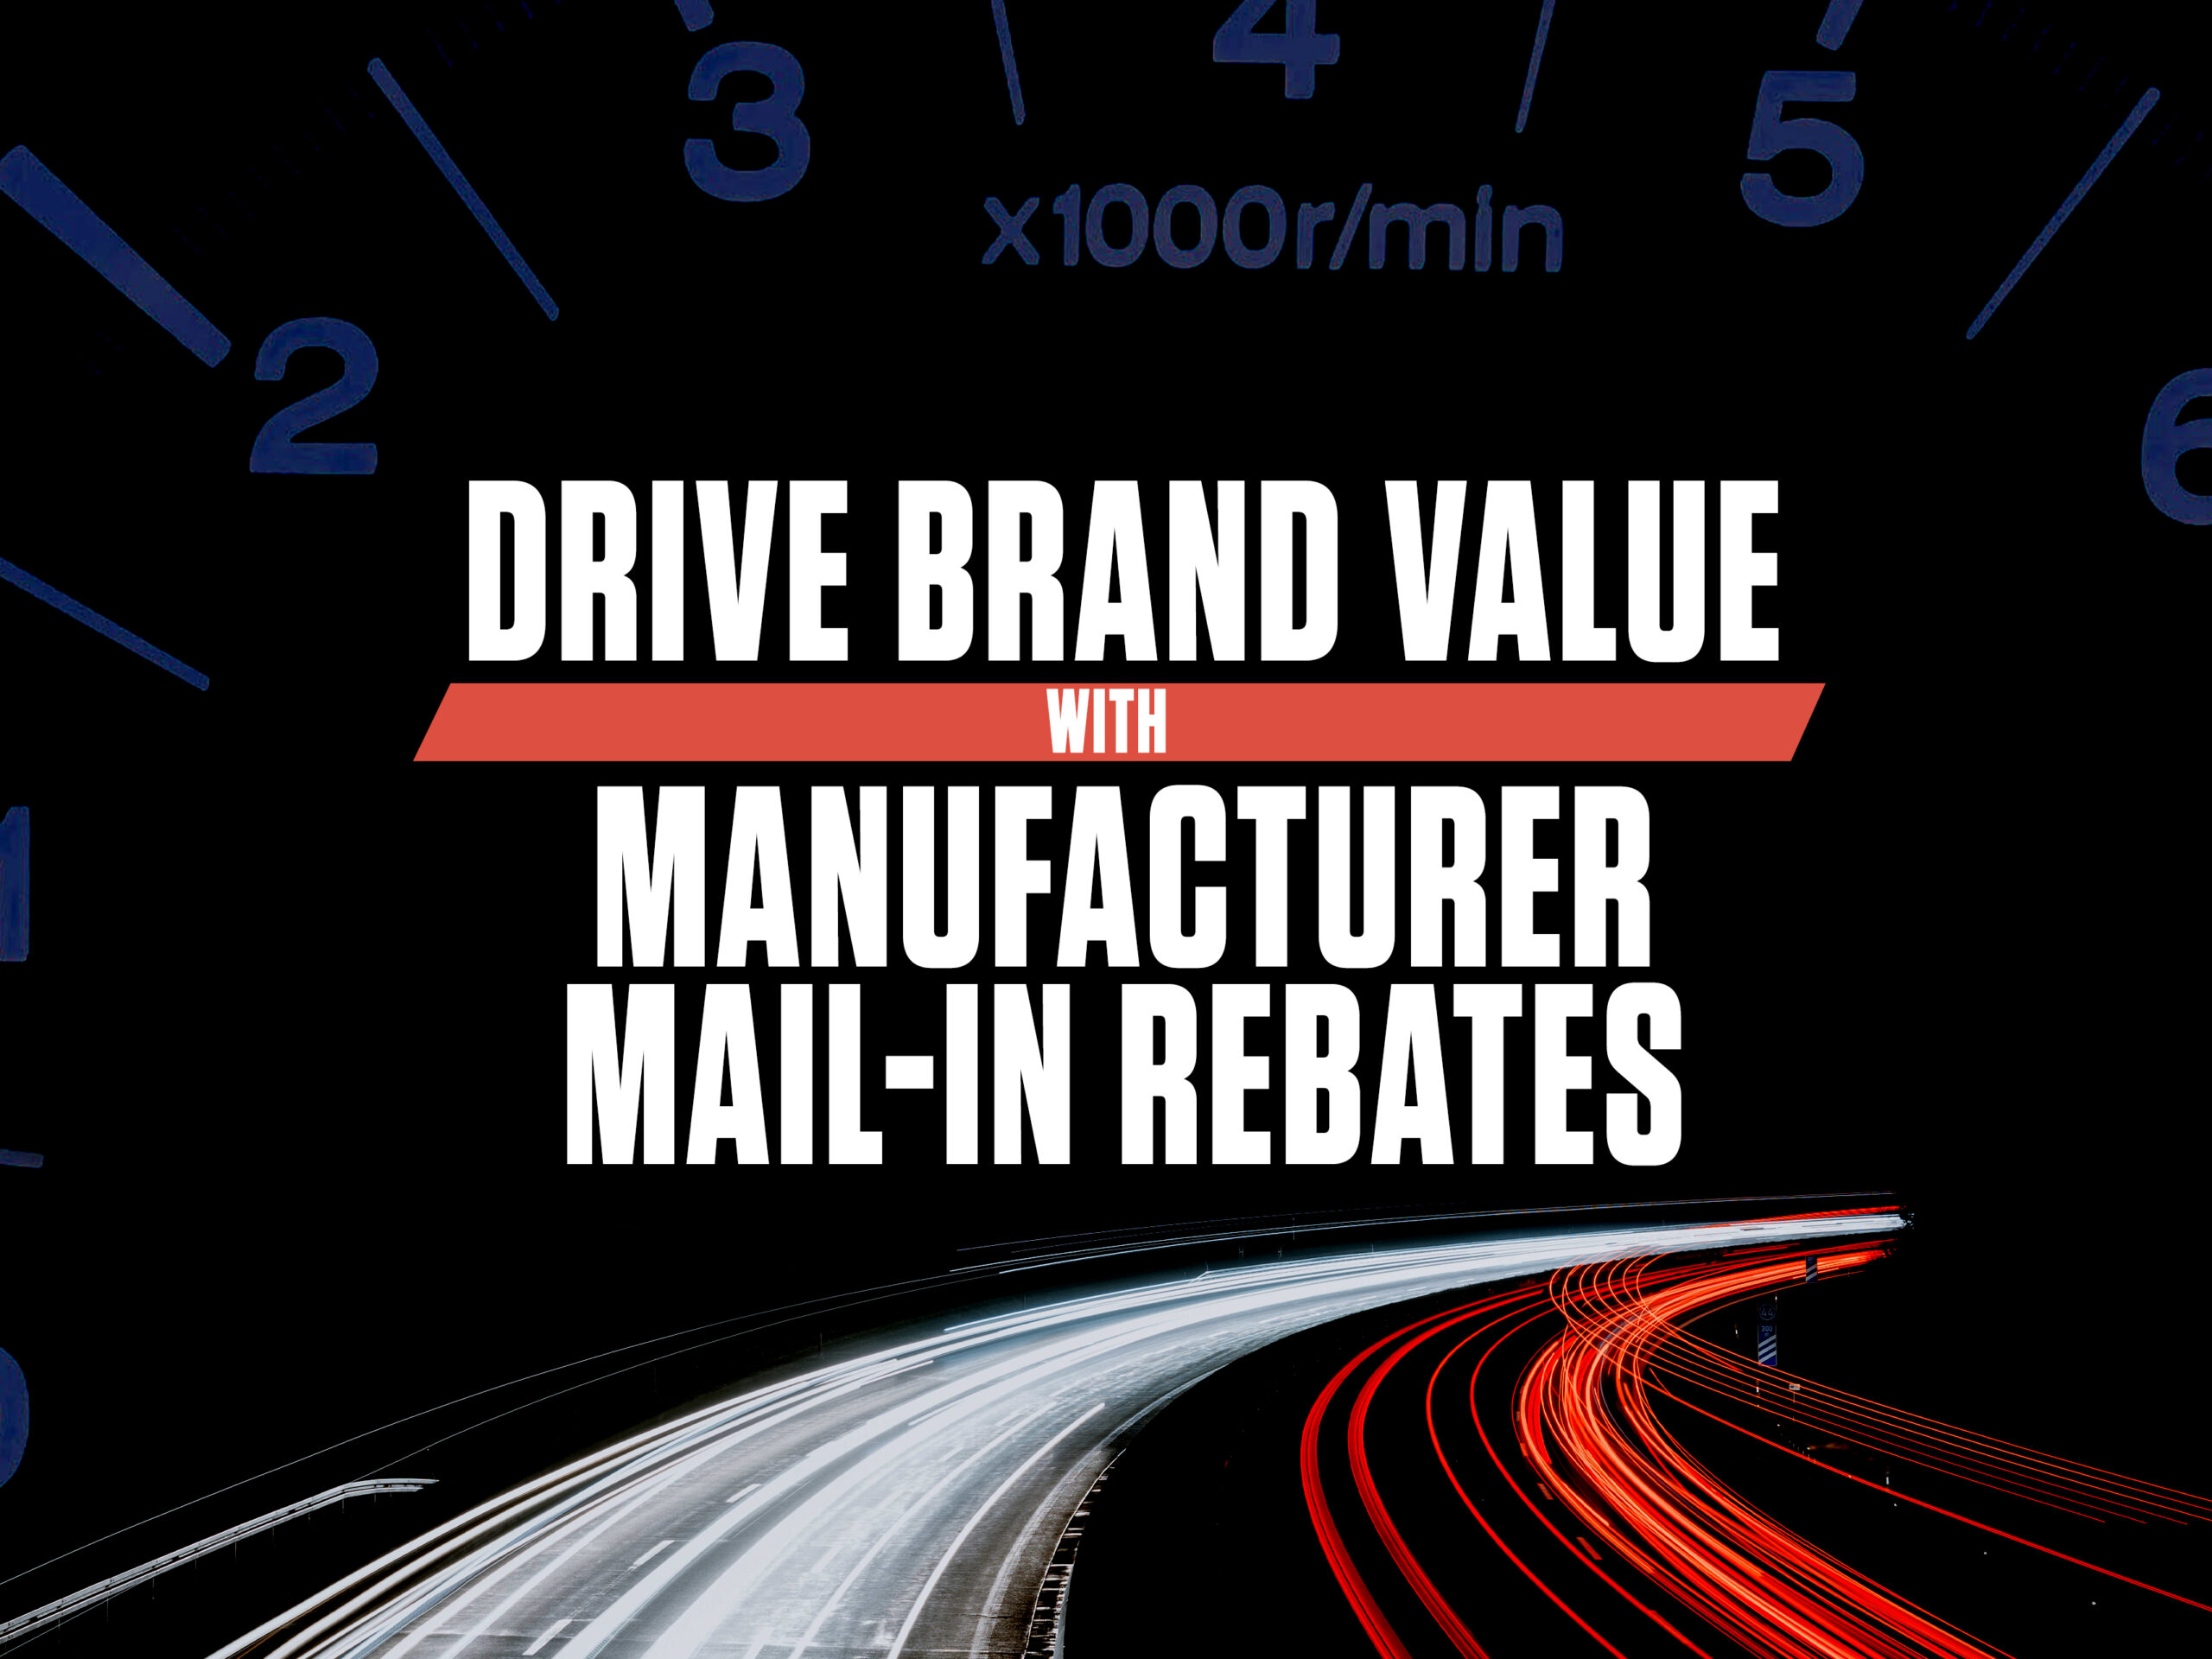 Drive Brand Value with Manufacturer Mail-In Rebates